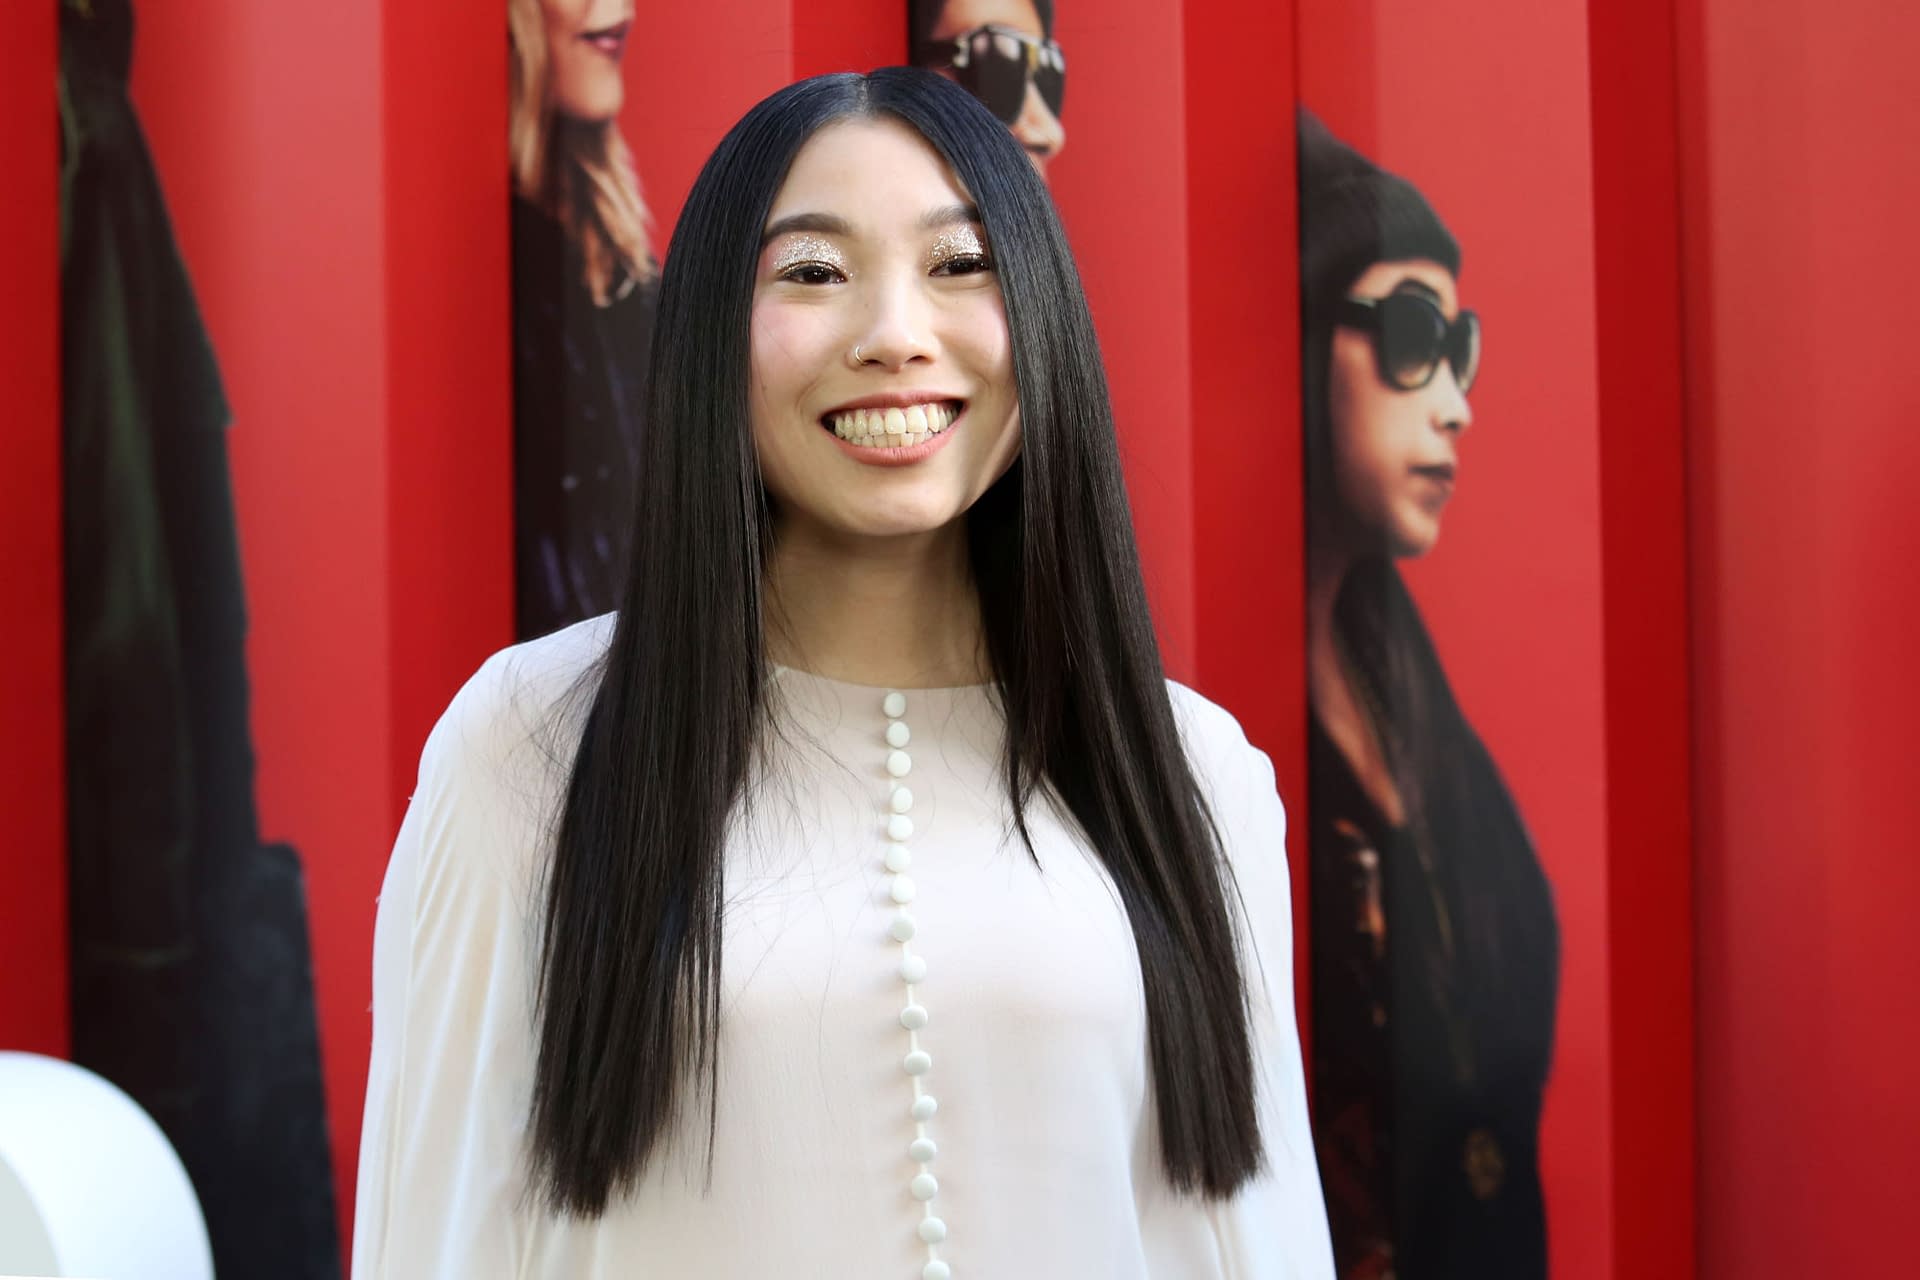 "Awkwafina Is Nora from Queens": Awkwafina's Comedy Central Sets Title, Director